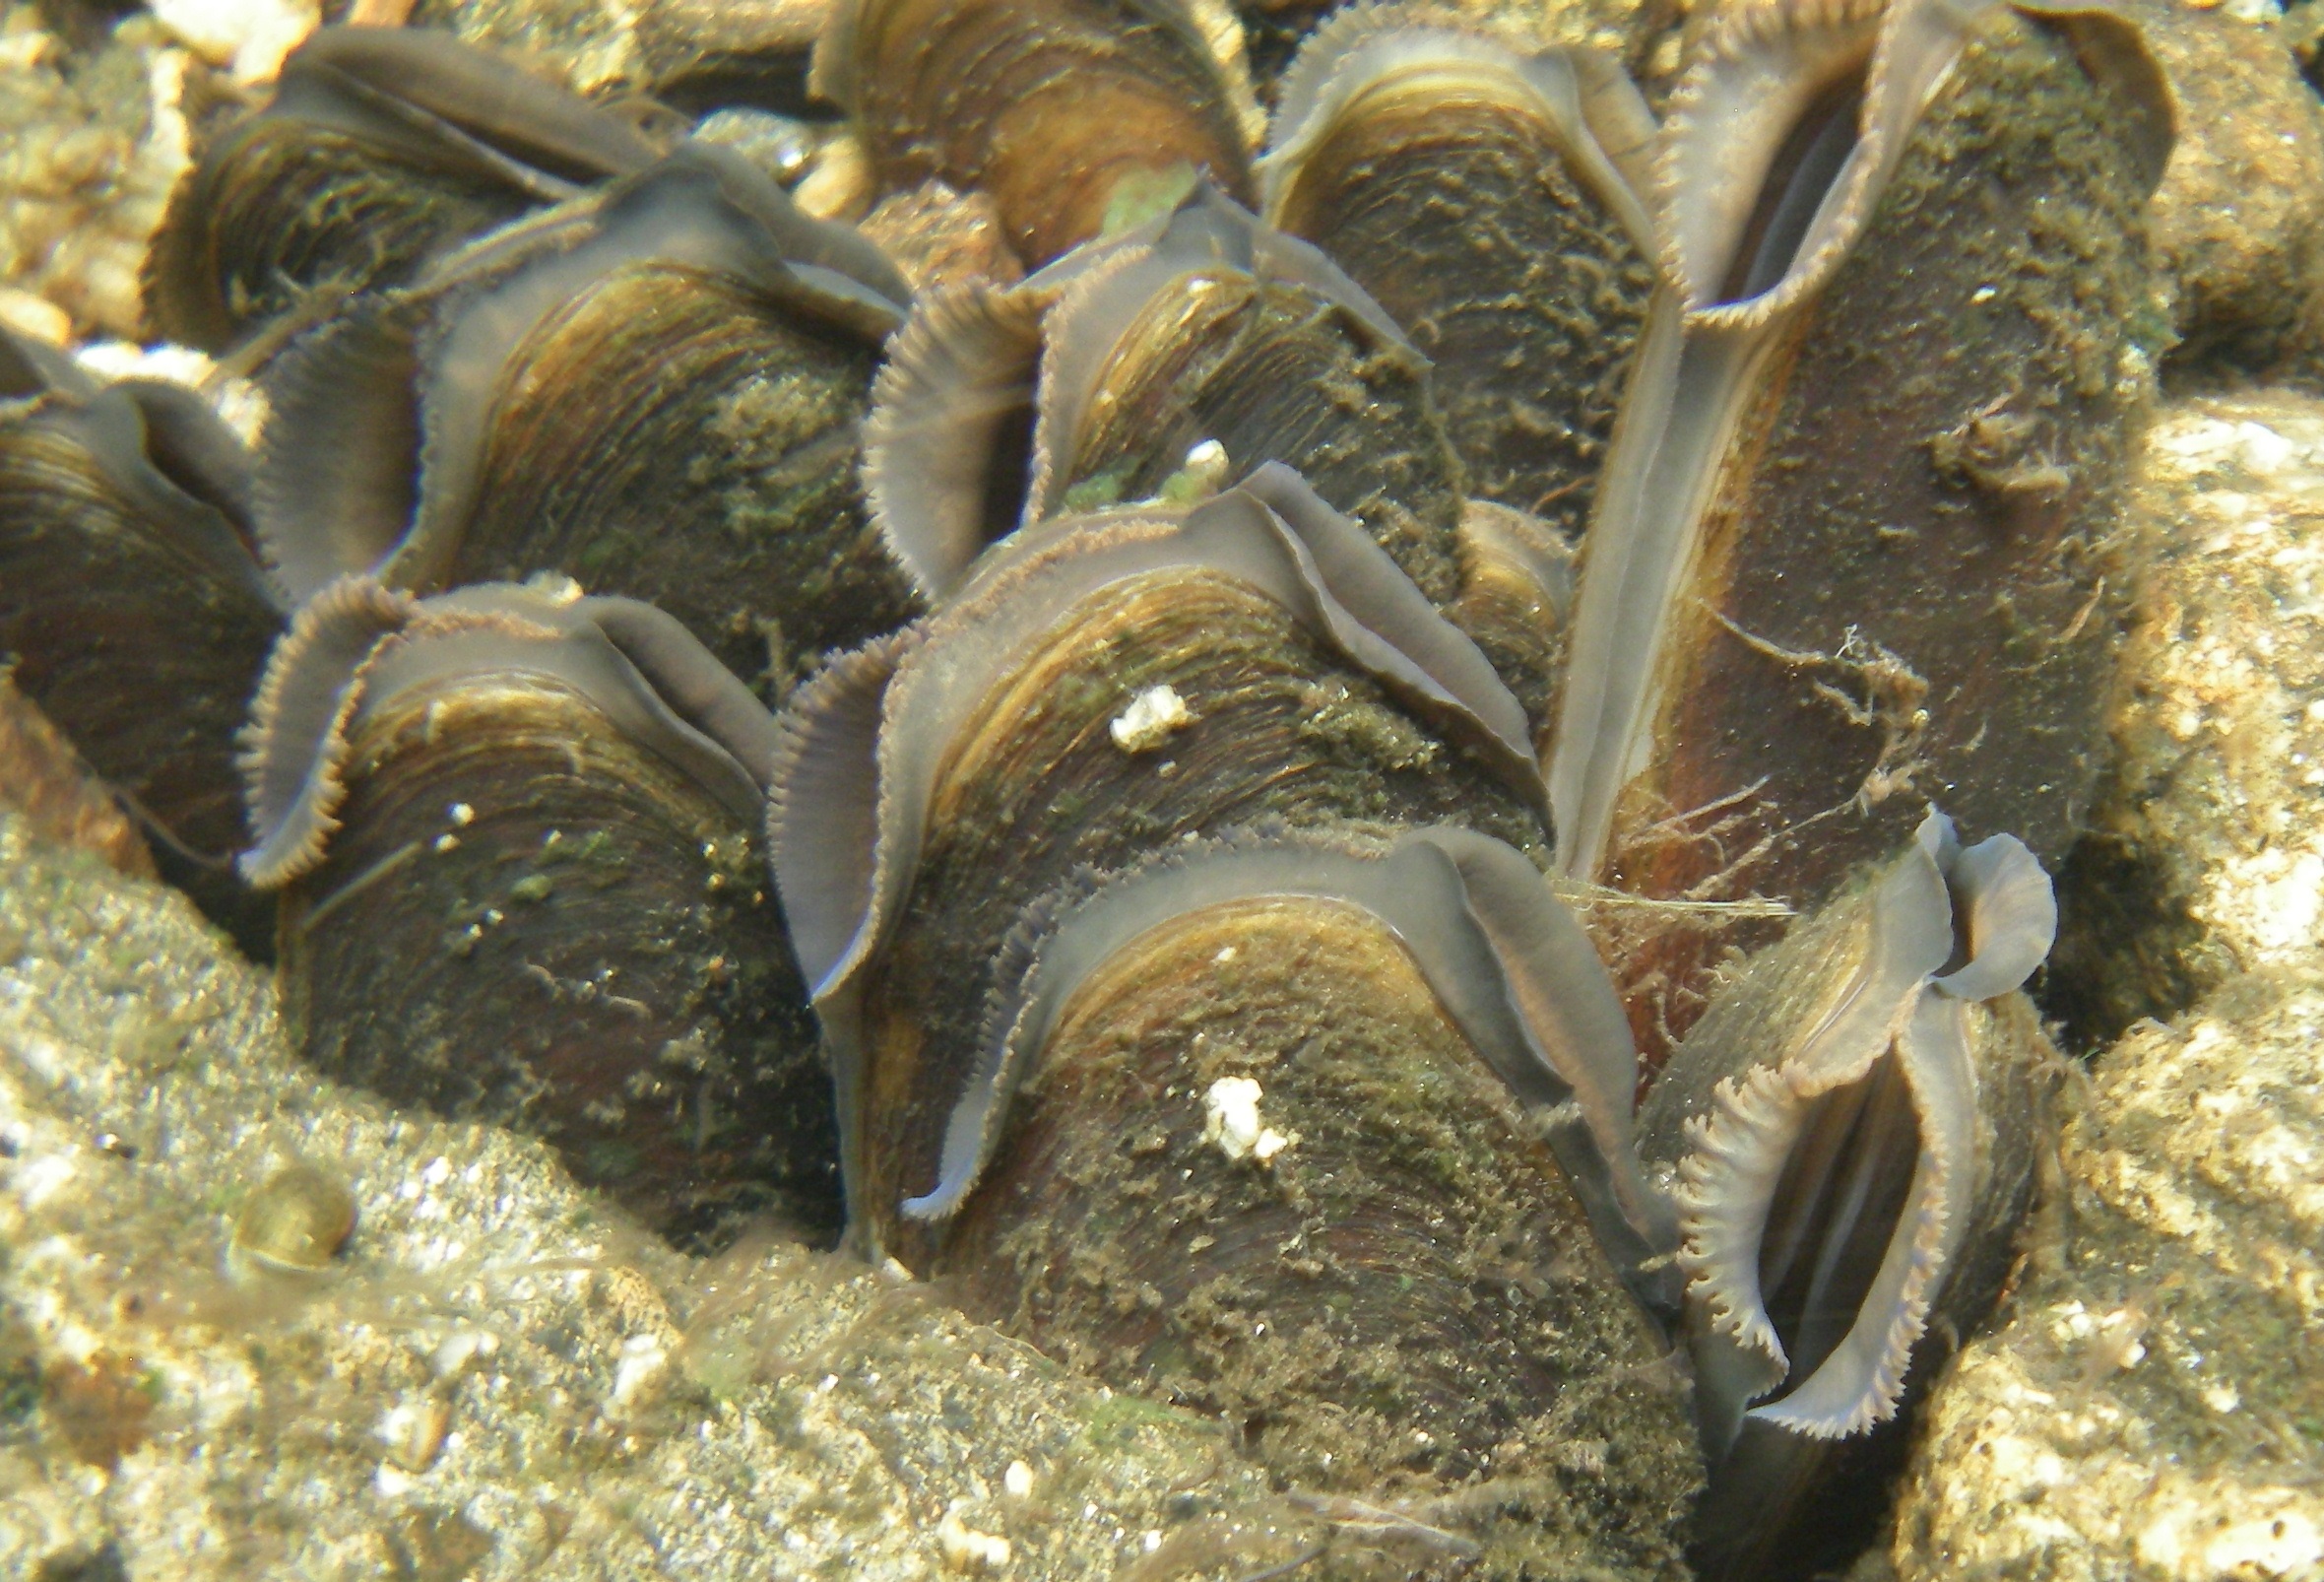 A small group of freshwater pearl mussels